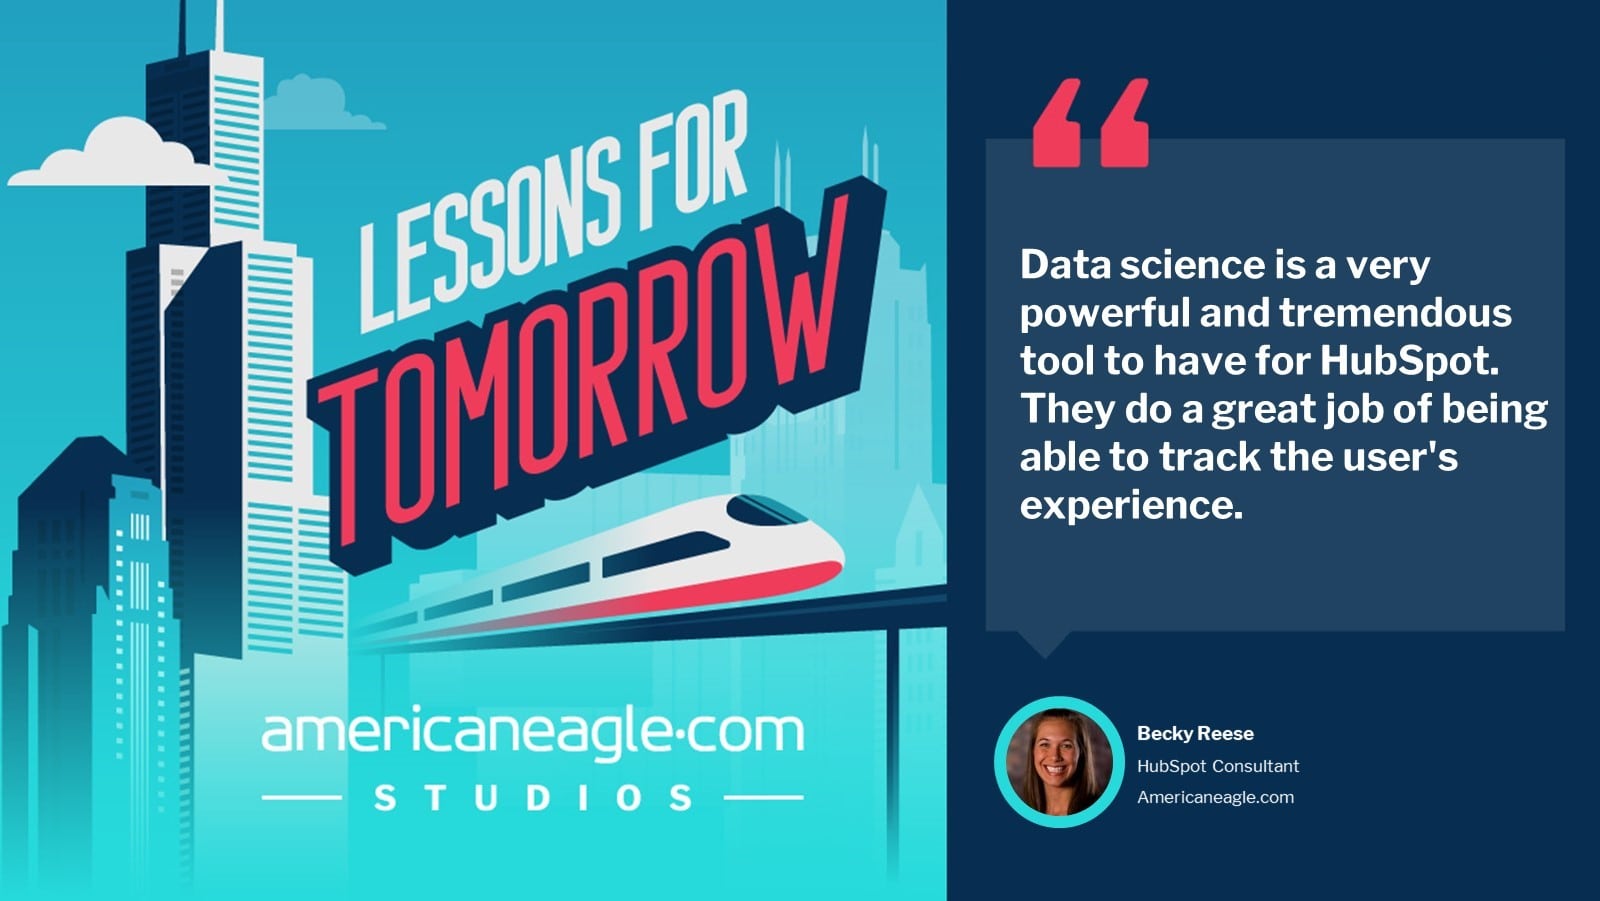 Becky Reese discusses the importance of data science with HubSpot